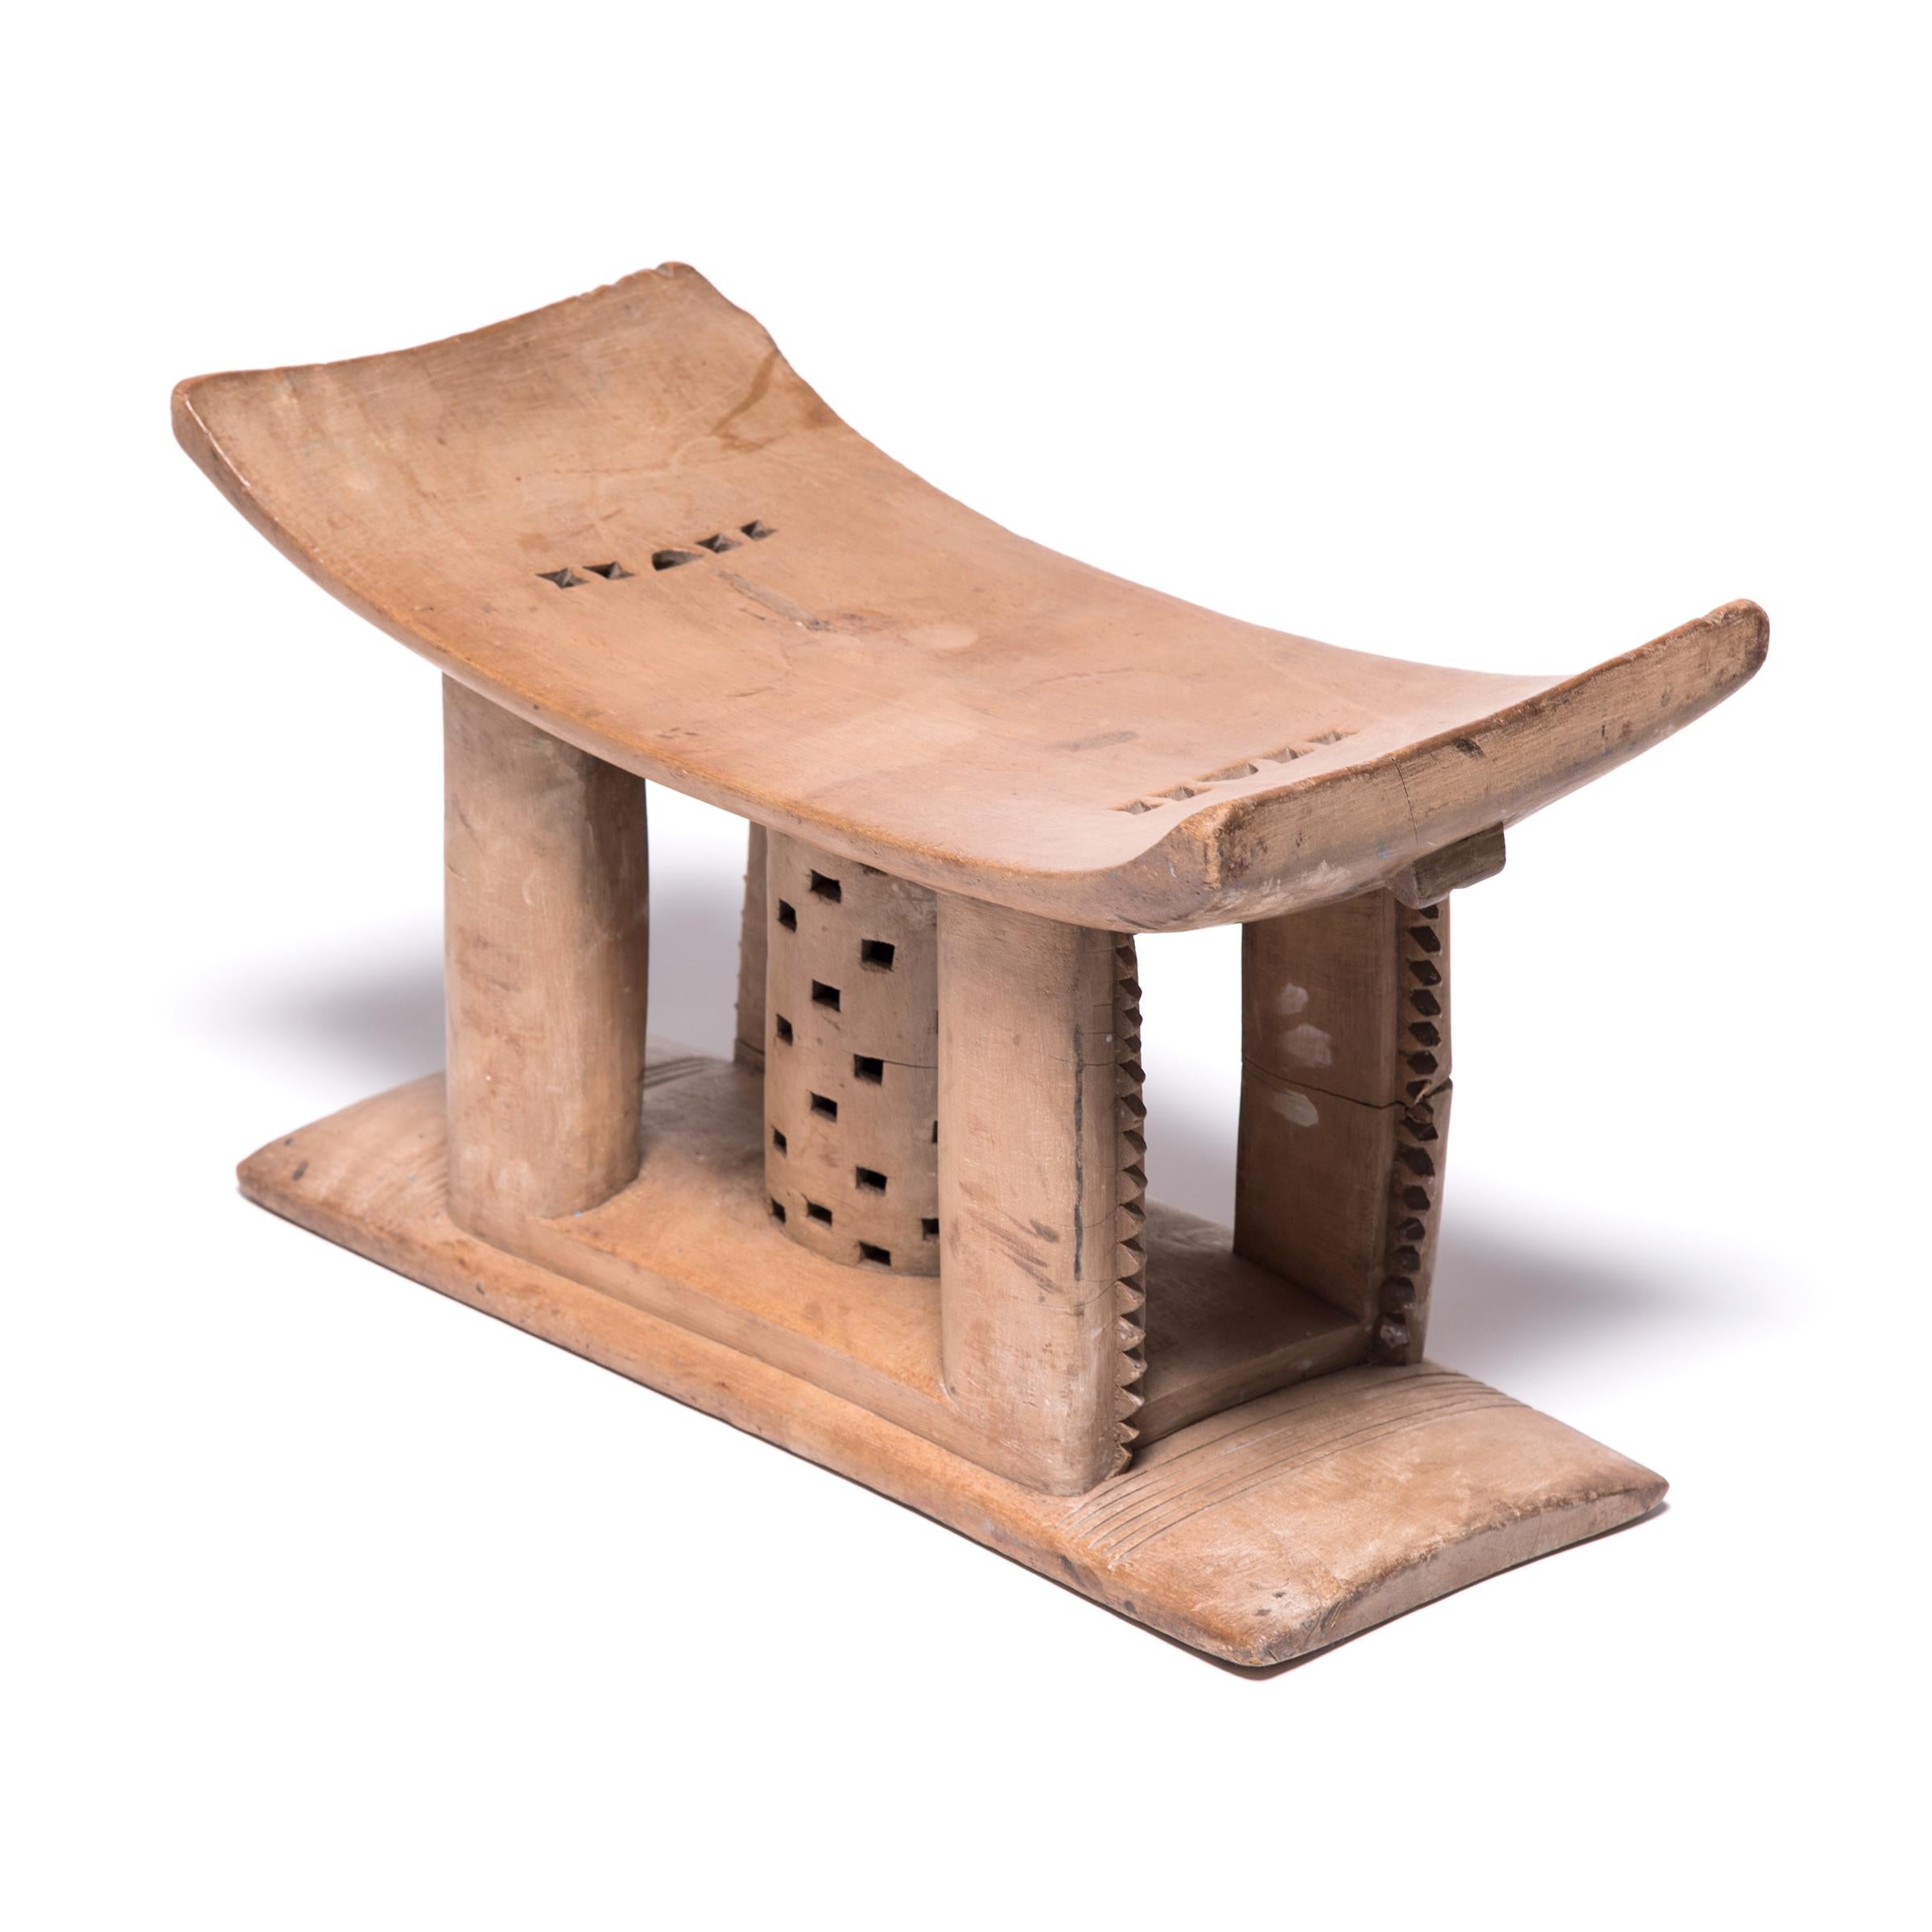 In traditional Ashanti culture, stools indicated power, status, and lines of succession. The flat base, curved seat, and ridged supports of this stool reference the Ashanti King stool. The central symbol is the cylindrical version of the Kete Pa, or